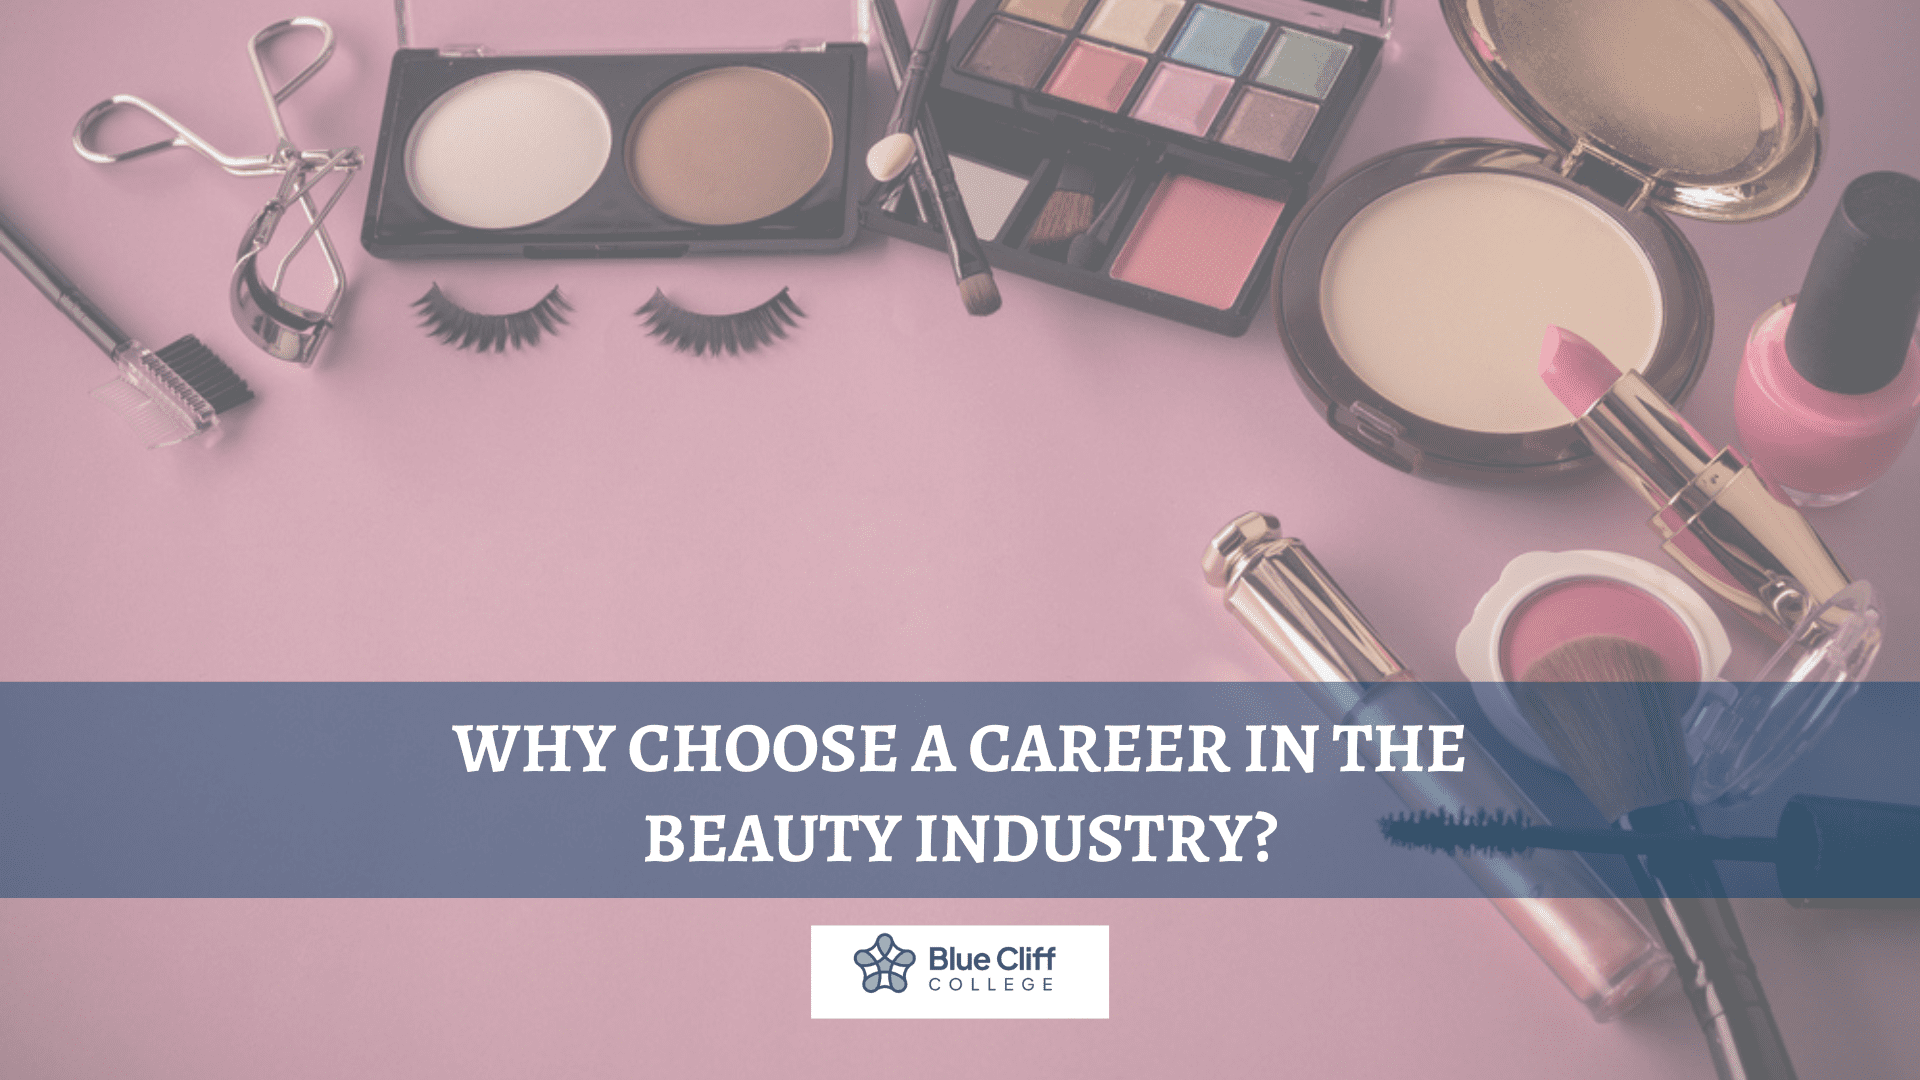 Why Choose a Career in the Beauty Industry